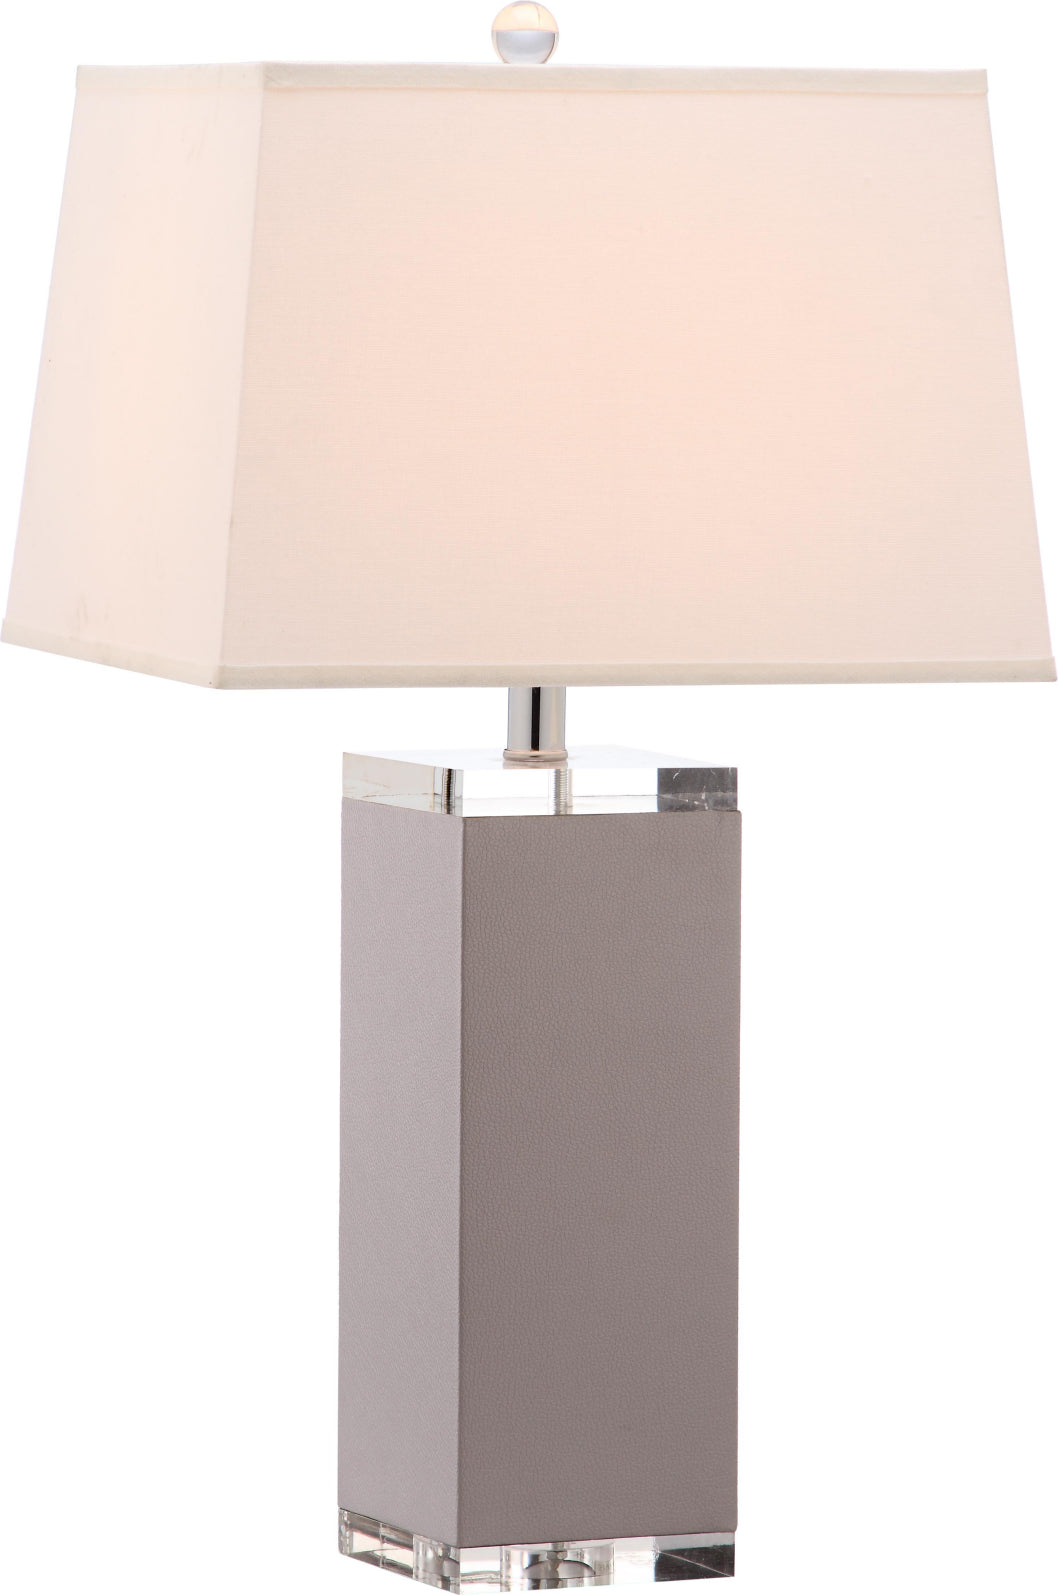 Safavieh Deco 27-Inch H Leather Table Lamp Grey main image